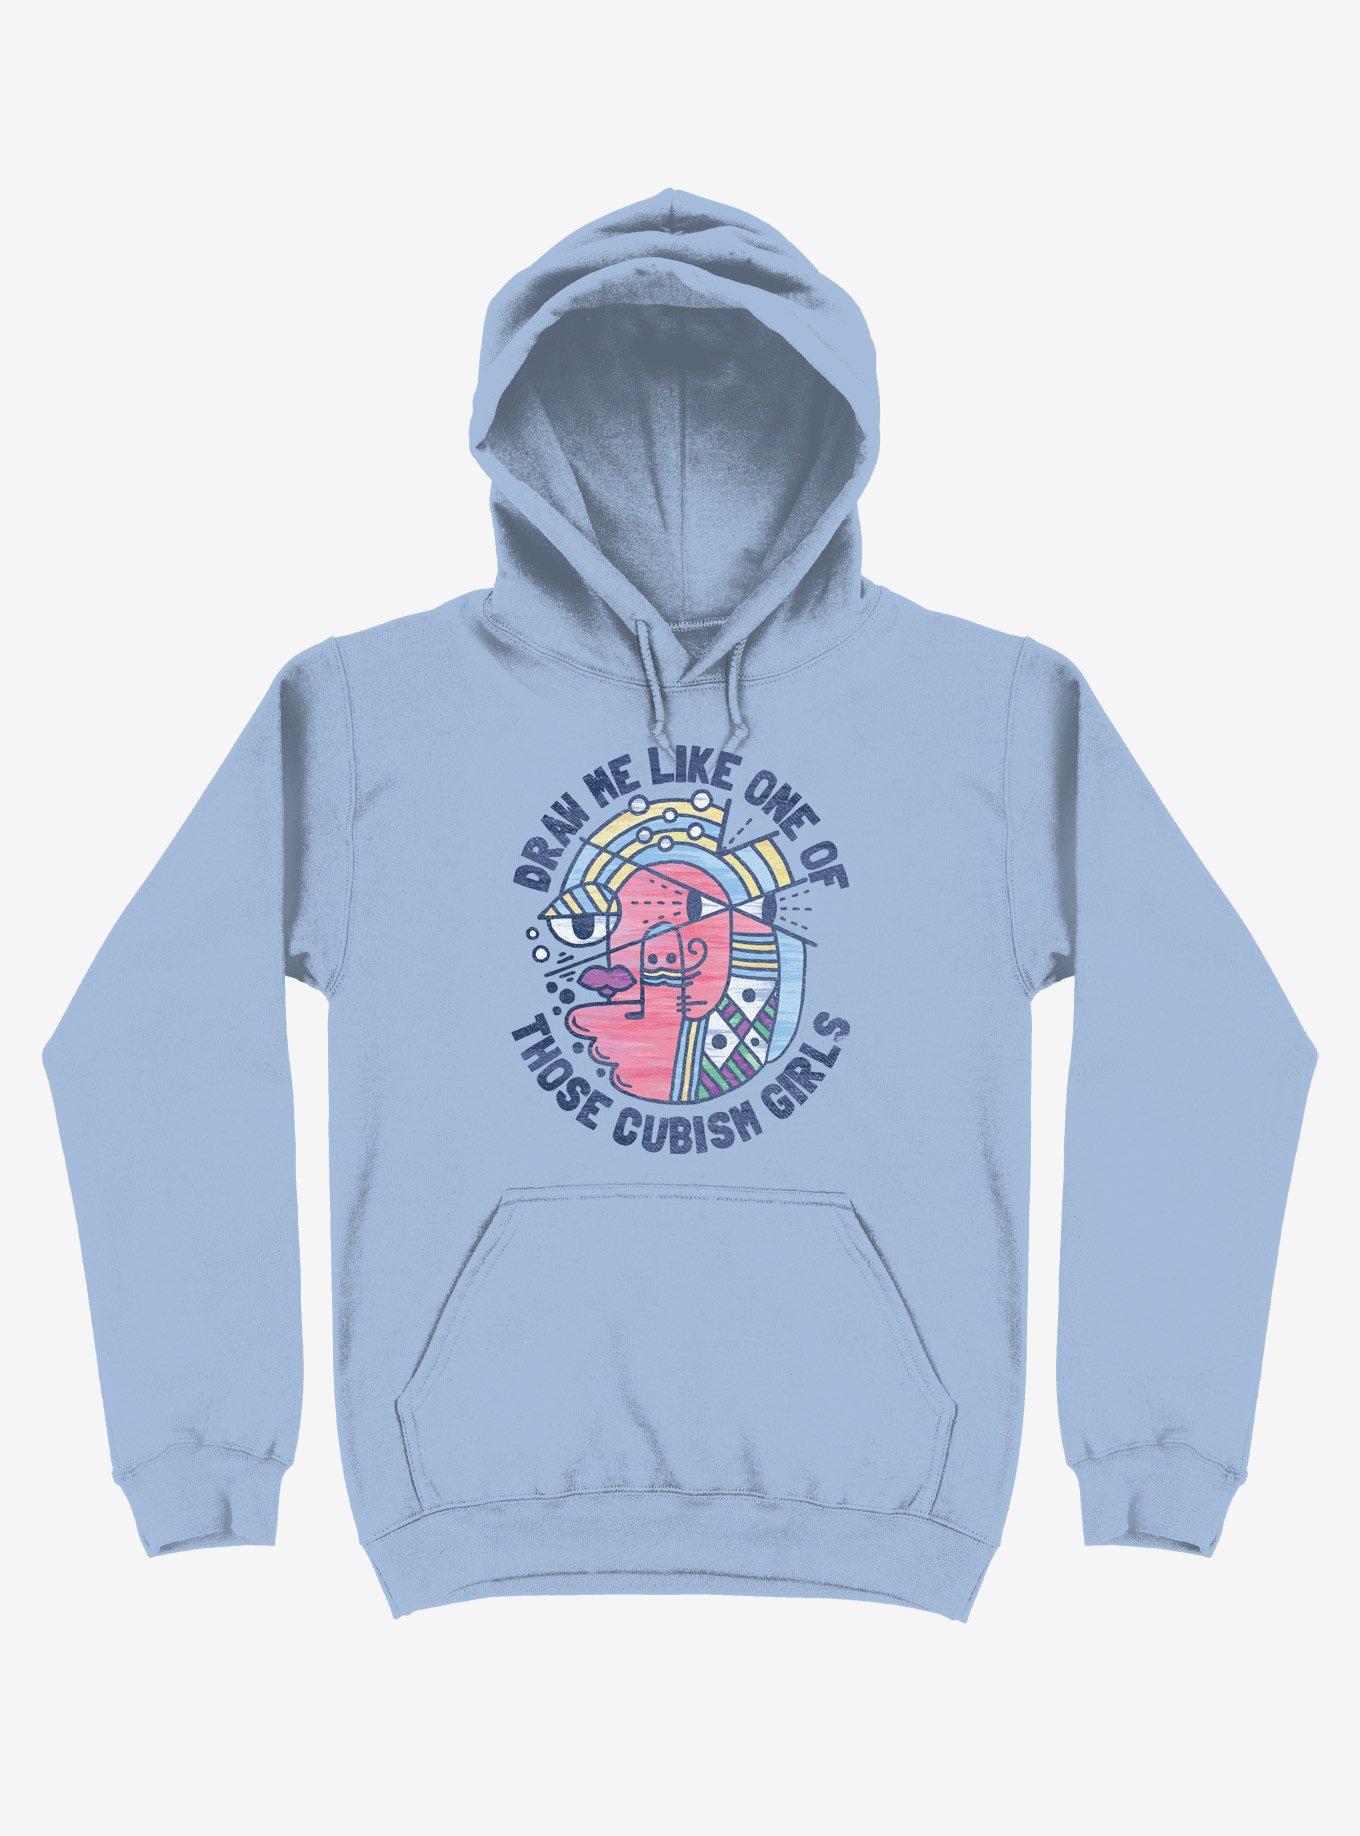 Draw Me Like On Of Those Cubism Girls Light Blue Hoodie, , hi-res